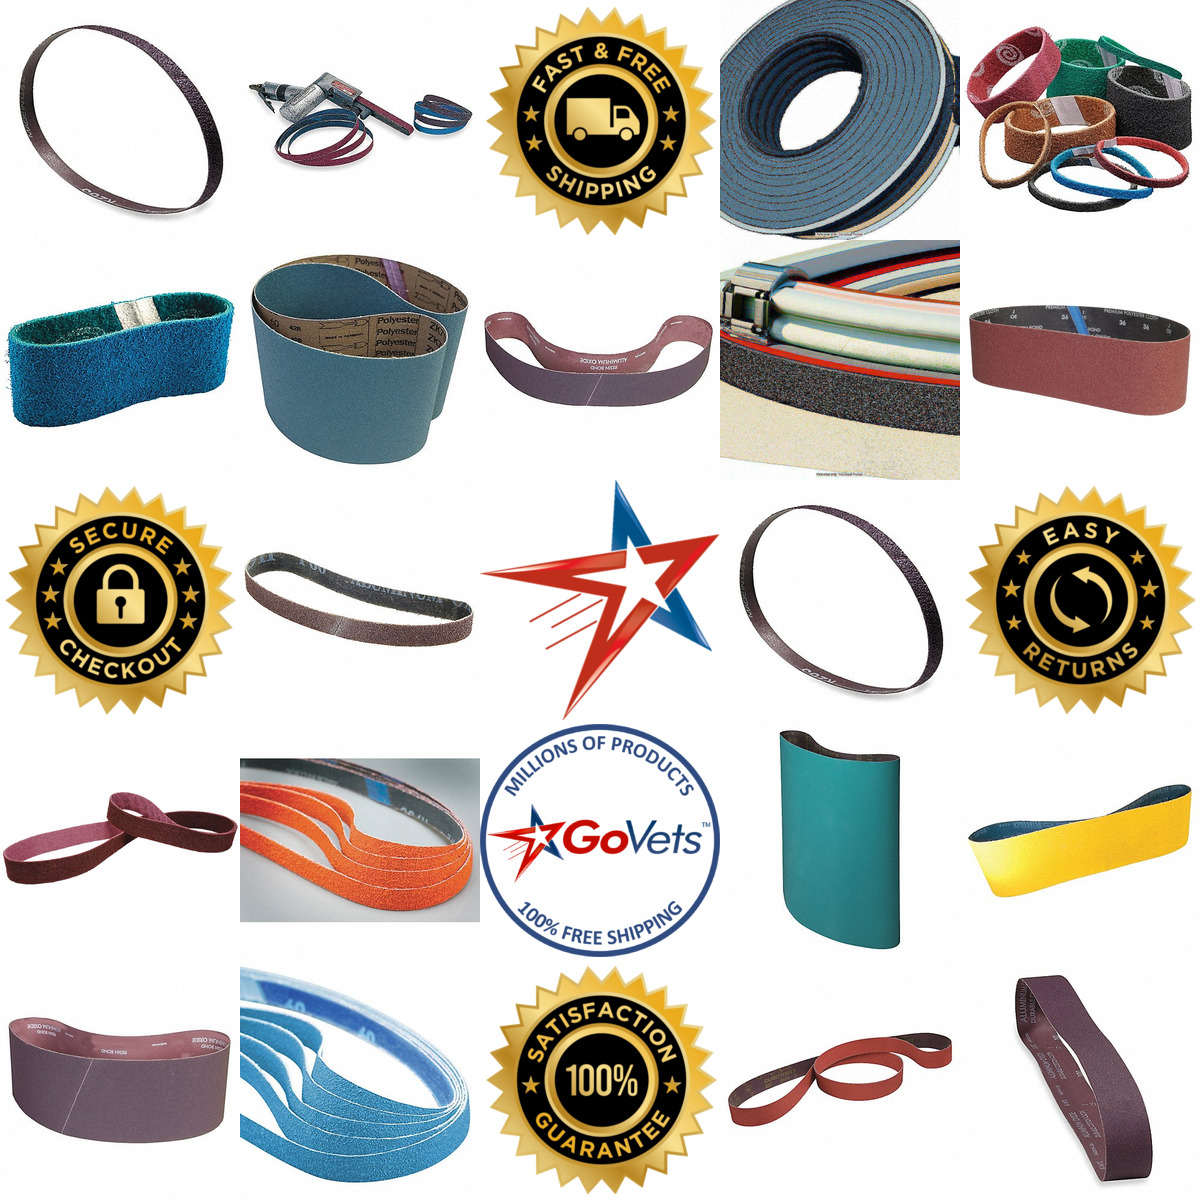 A selection of Sanding Belts and Kits products on GoVets